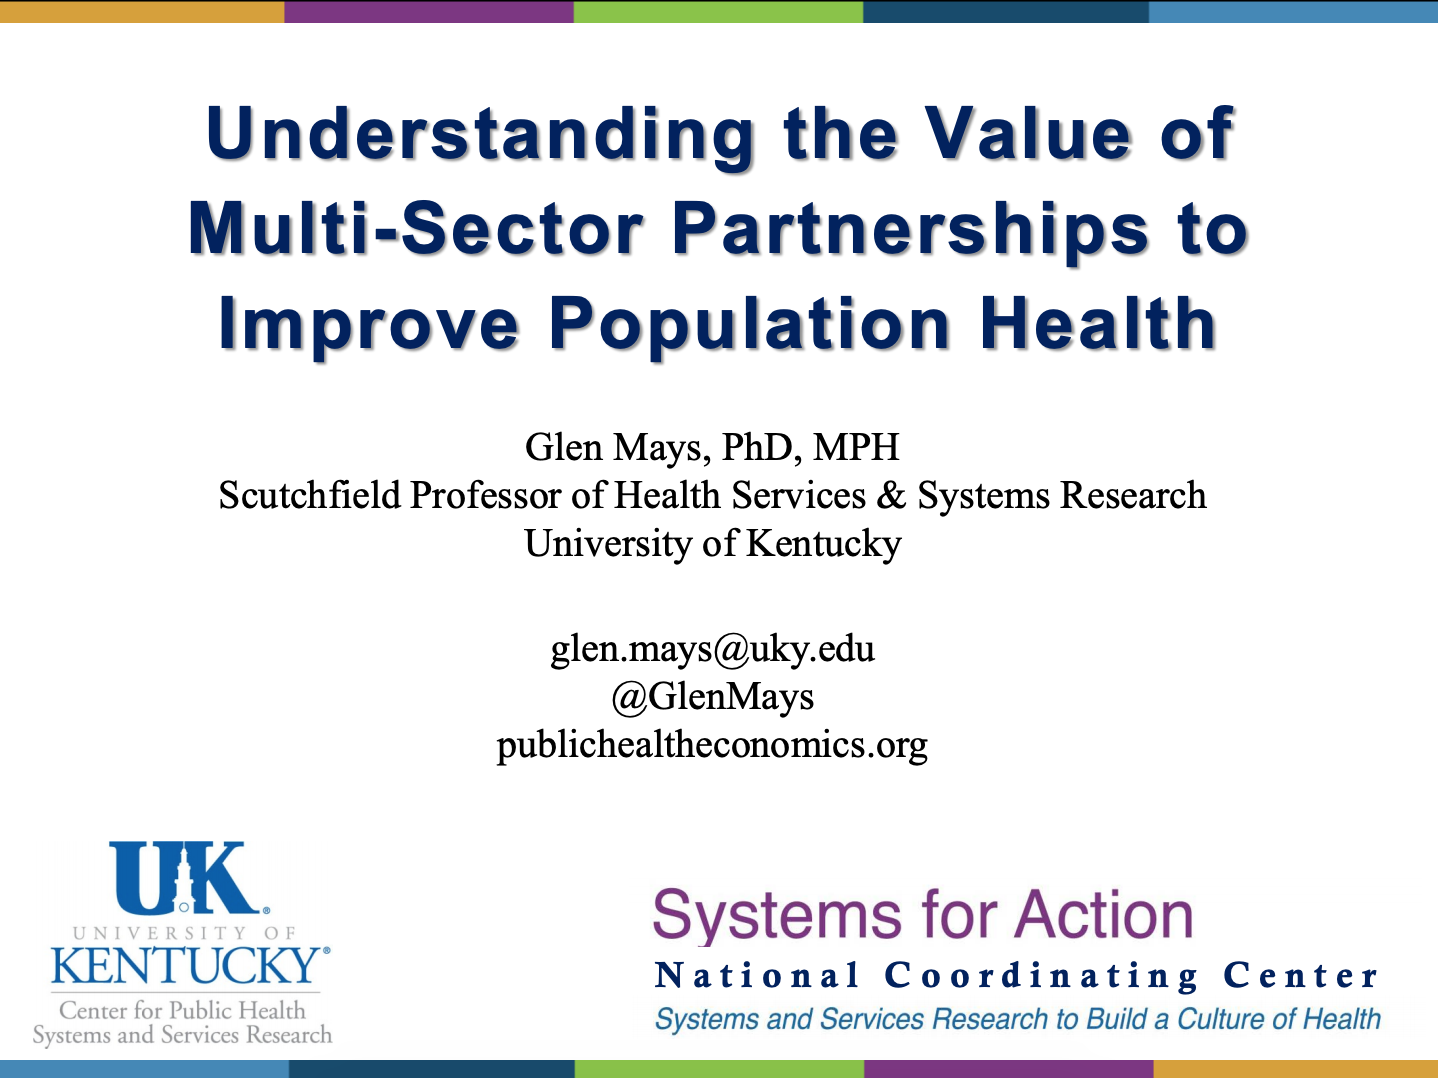 Understanding the Value of Multi-Sector Partnerships to Improve Population Health